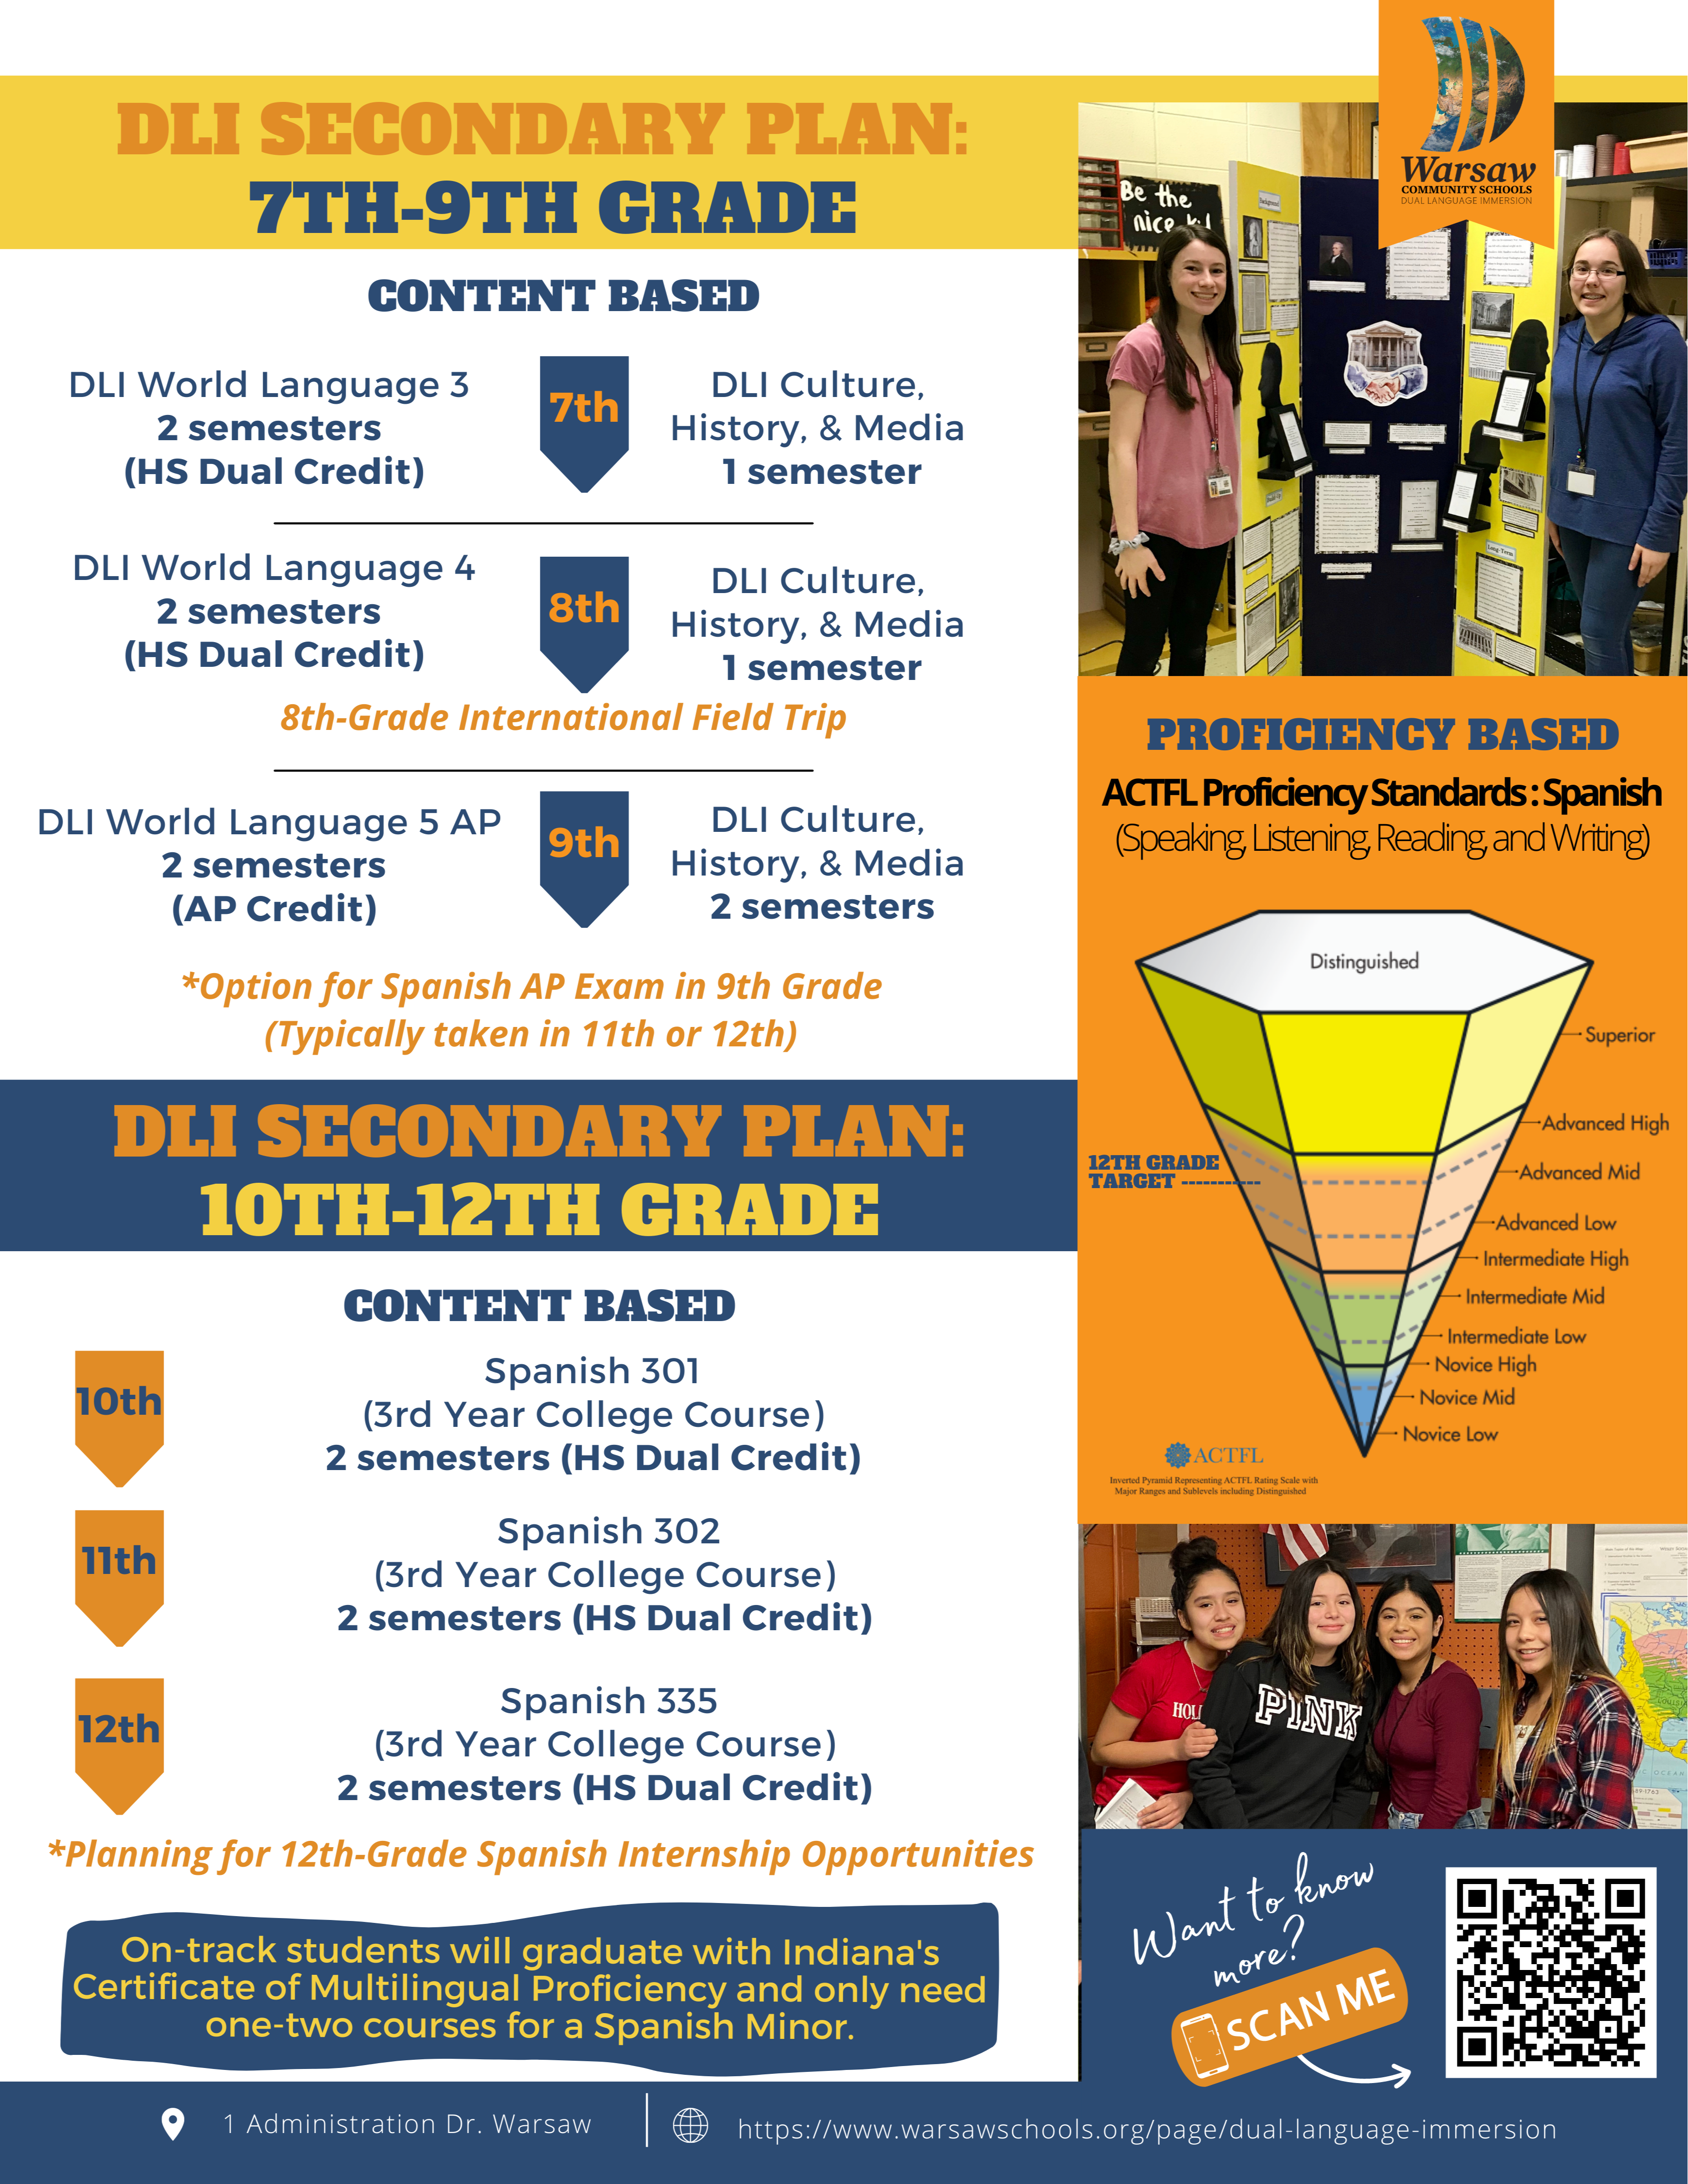 DLI Secondary Plan 7th-9th grade Content based . 7th Grade: DLI World Language 3, 2 semesters (HS Dual Credit)  DLI Culture, History, & Media 1 semester. 8th: DLI World Language 4 2 semesters (HS Dual Credit) DLI Culture, History, & MEdia 1 semester 8th grade international field trip. 9th: DLI World Language 5 AP, 2 semesters (AP Credit). DLI Culture, History, & Media 2 semesters * Option for Spanish AP Exam in 9th grade (typically taken in 11th or 12th).  DLI Secondary Plan: 10th-12th grade. Content Based. 10th: Spanish 301 (3rd year college course) 2 semesters (HS Dual Credit). 11th Spanish 302 (3rd year college course)  2 semesters (HS Dual Credit) 12th: Spanish 335 (3rd year college course) 2 semesters (HS Dual Credit) * Planning for 12th grade spanish internship opportunities. On-track students will graduate with indiana's certificate  of multilingual proficiency and only need one-two courses for a spanish minor. Image of DLI students posing with a trifold display, proficiency standards graphic, and smiling dli students. QR code in bottom right "want to know more? SCAN ME". 